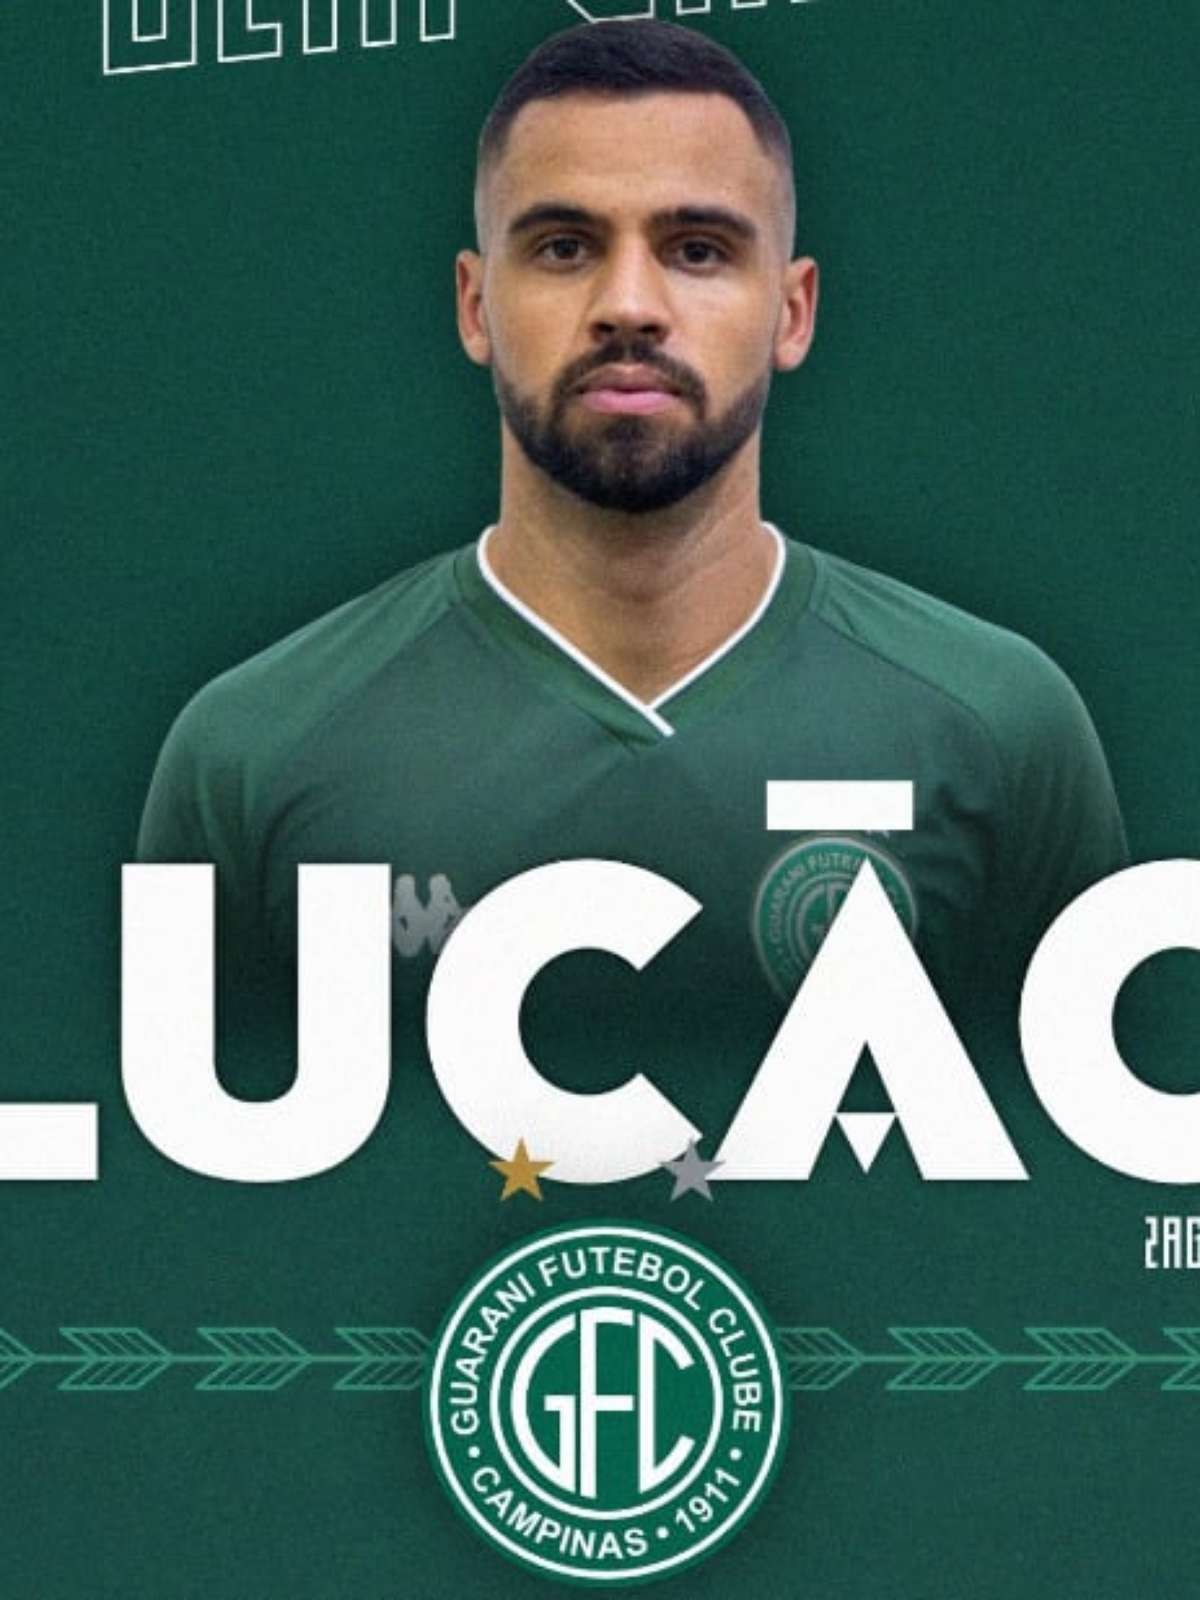 Luccao